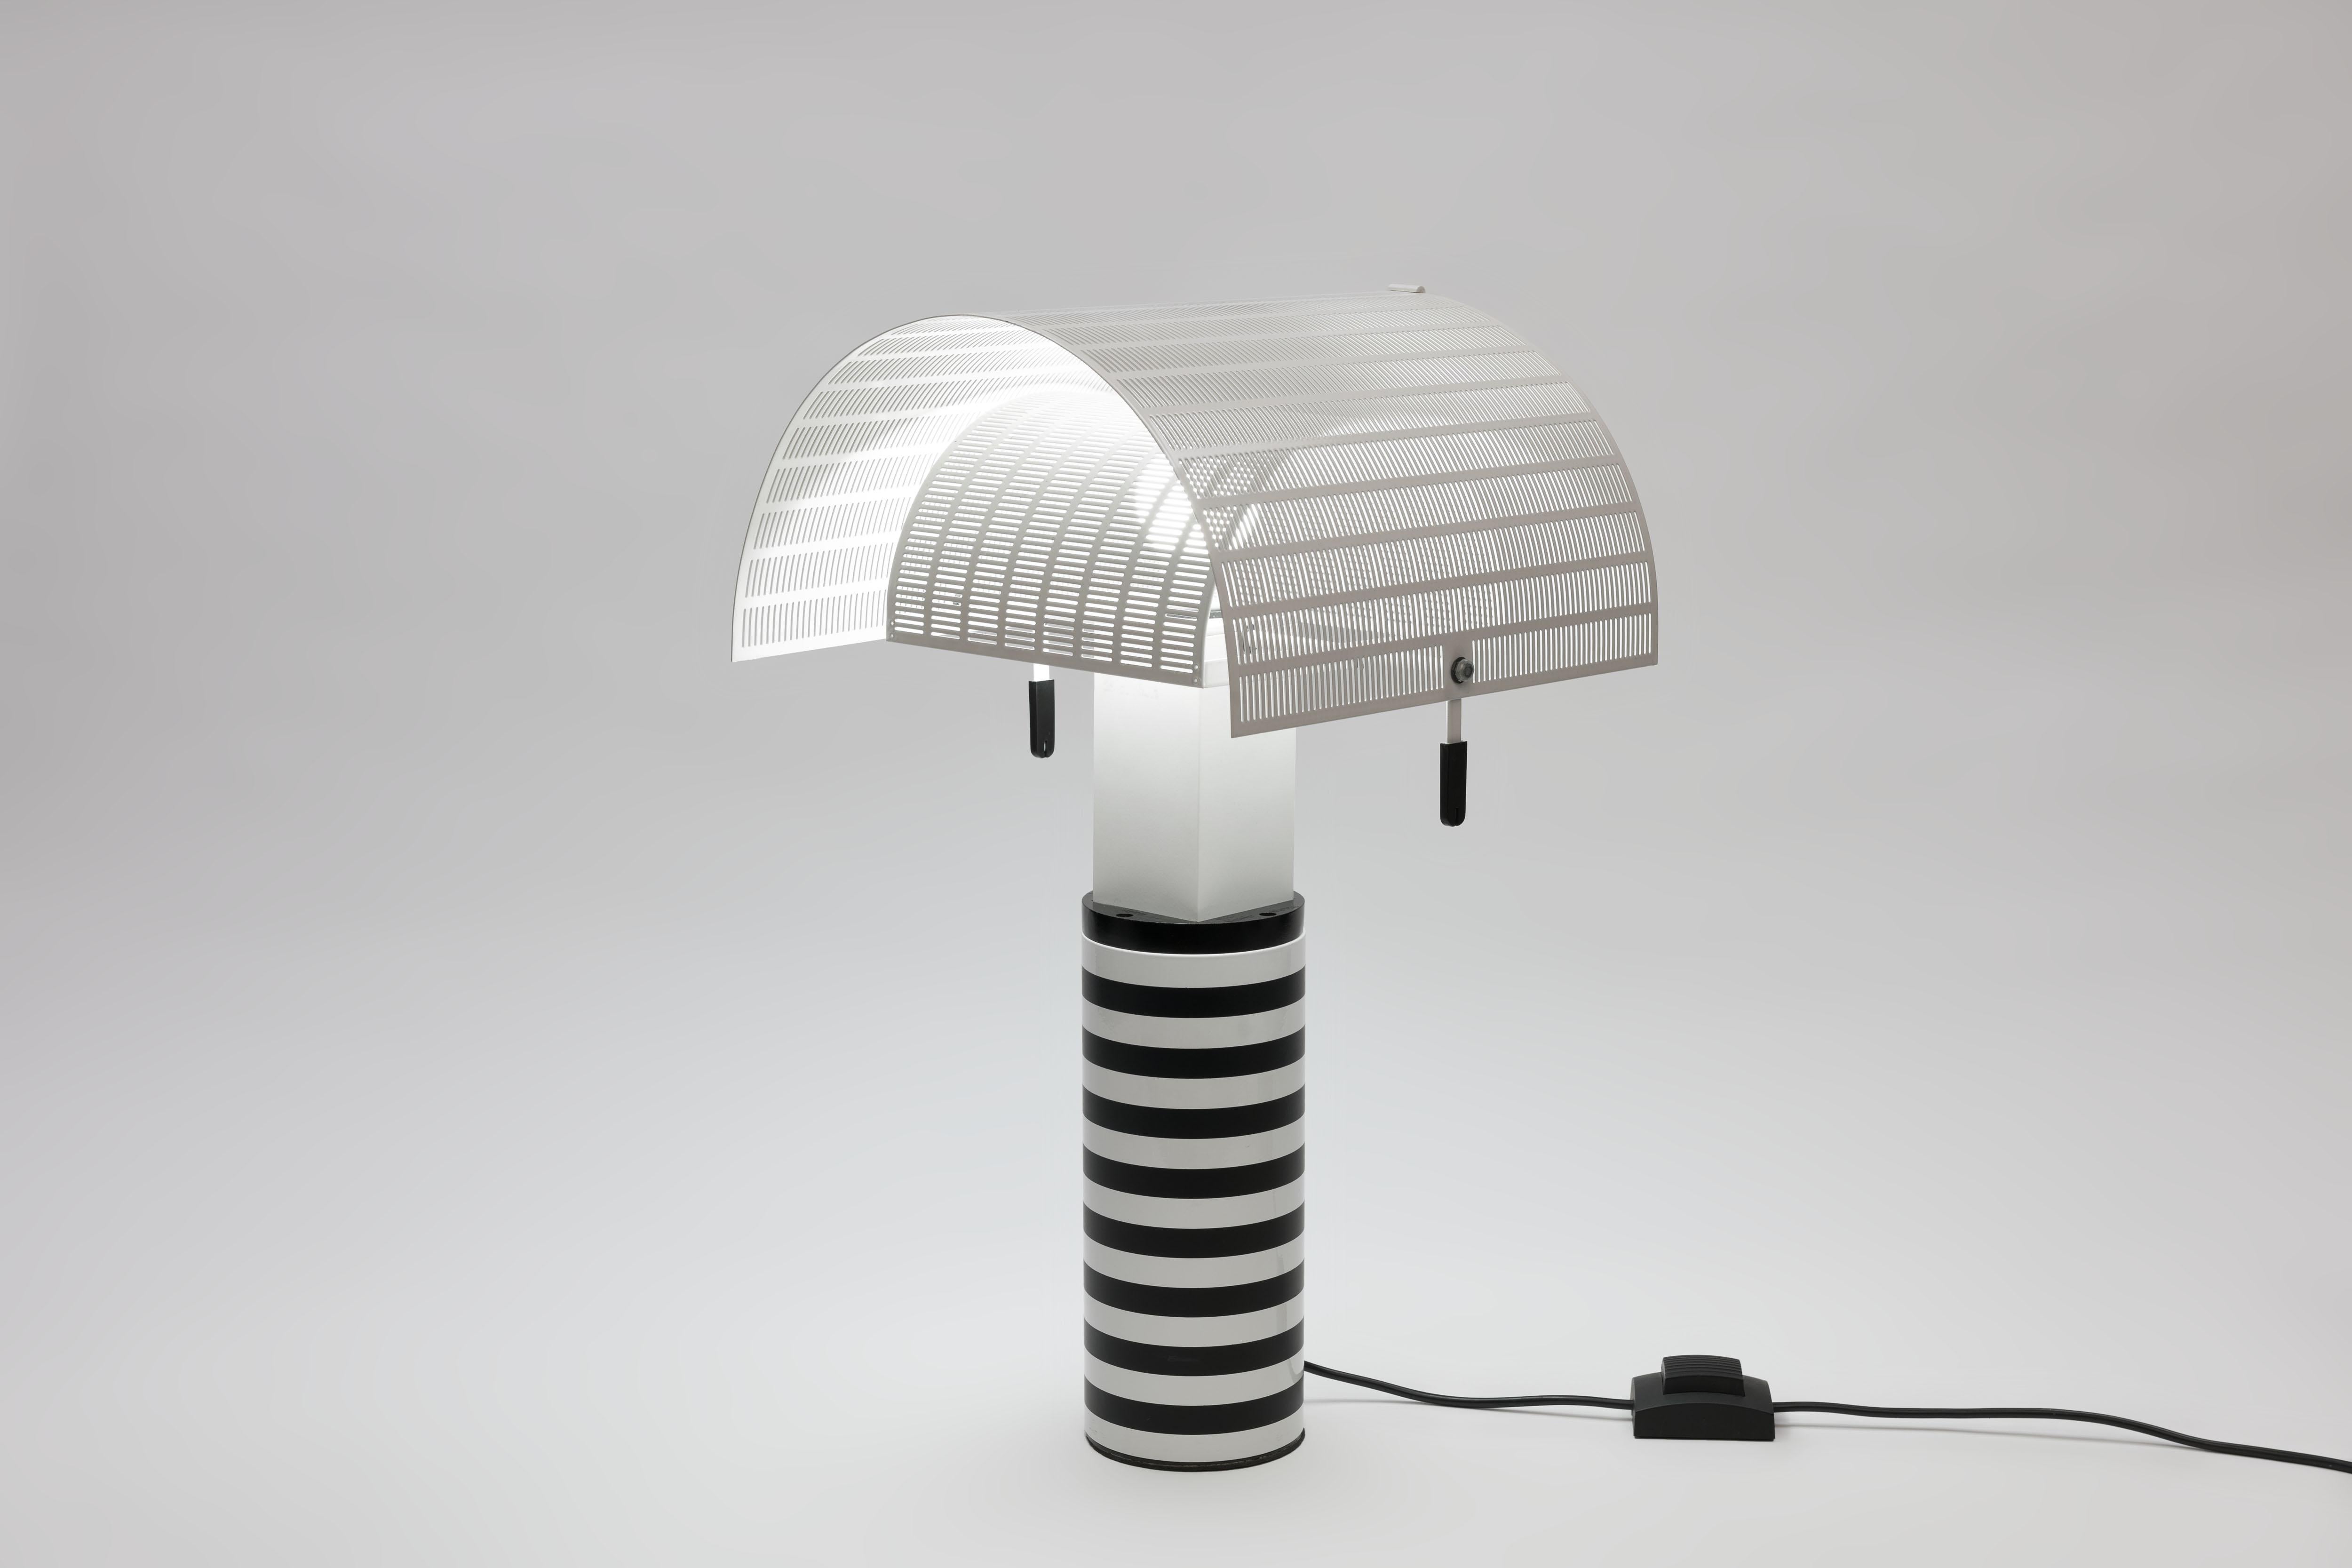 Iconic 'Shogun' lamp by Swiss-Italian Architect Mario Botta. Signature black and white striped base with pivoting, slit-perforated white steel shade.
This execution is from the early 1990ies and comes in exceptional good and clean condition.
One